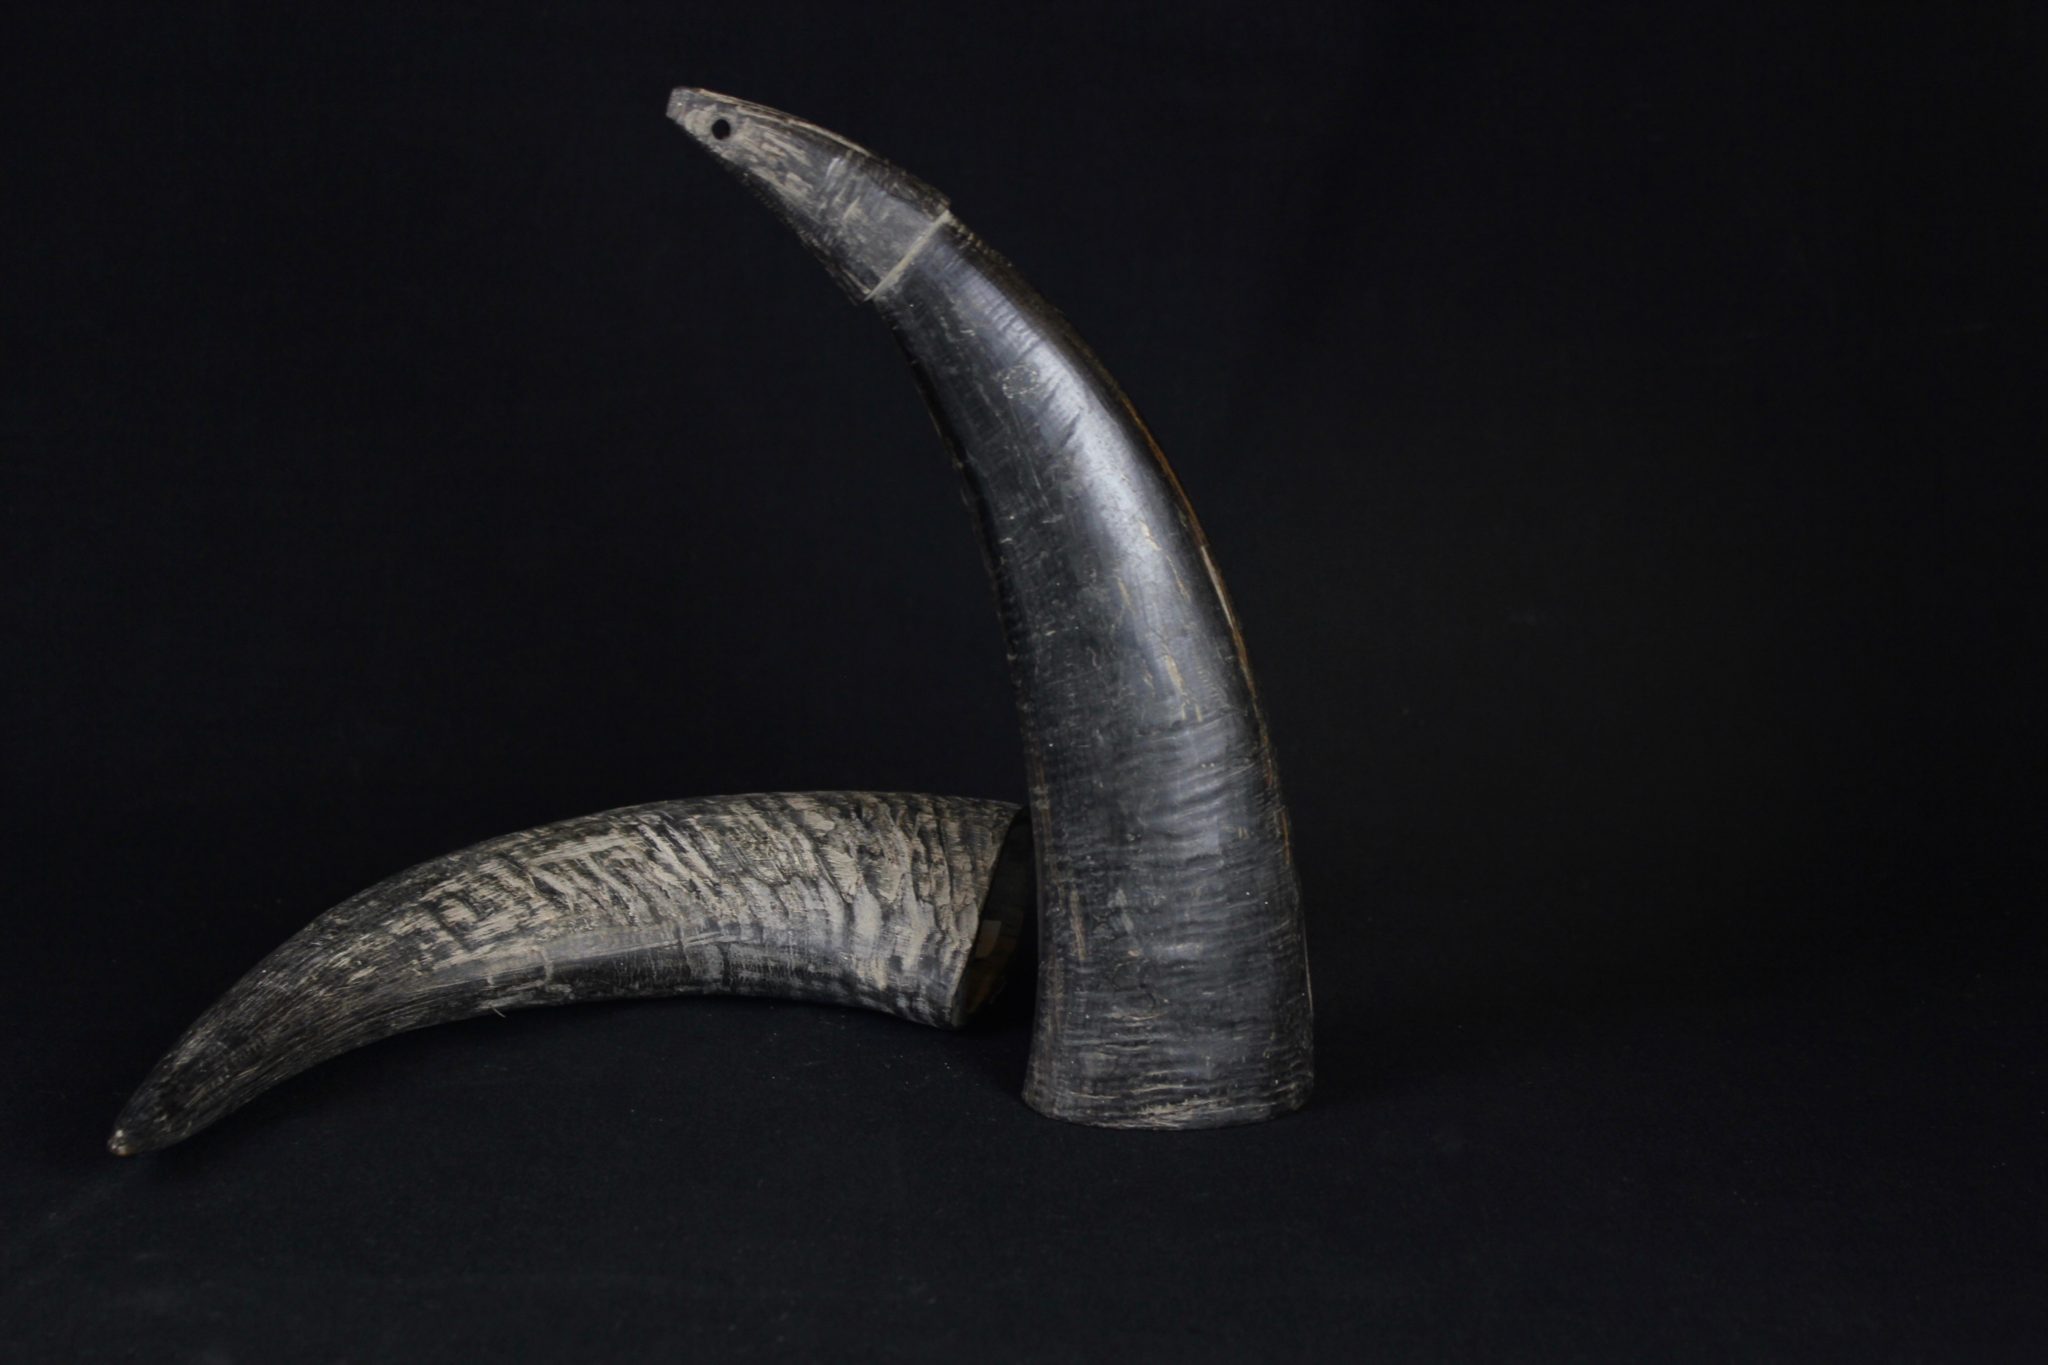 Horn for Drinking Spirits, Vietnam, Nghe An province, Thai people, Mid 20th c, Water Buffalo Horn, (horizontal - 11 ¾” x 2 ¼” x 5”, $160.); (vertical - 12” x 3 ¼” x 2 ¼”, $160.)